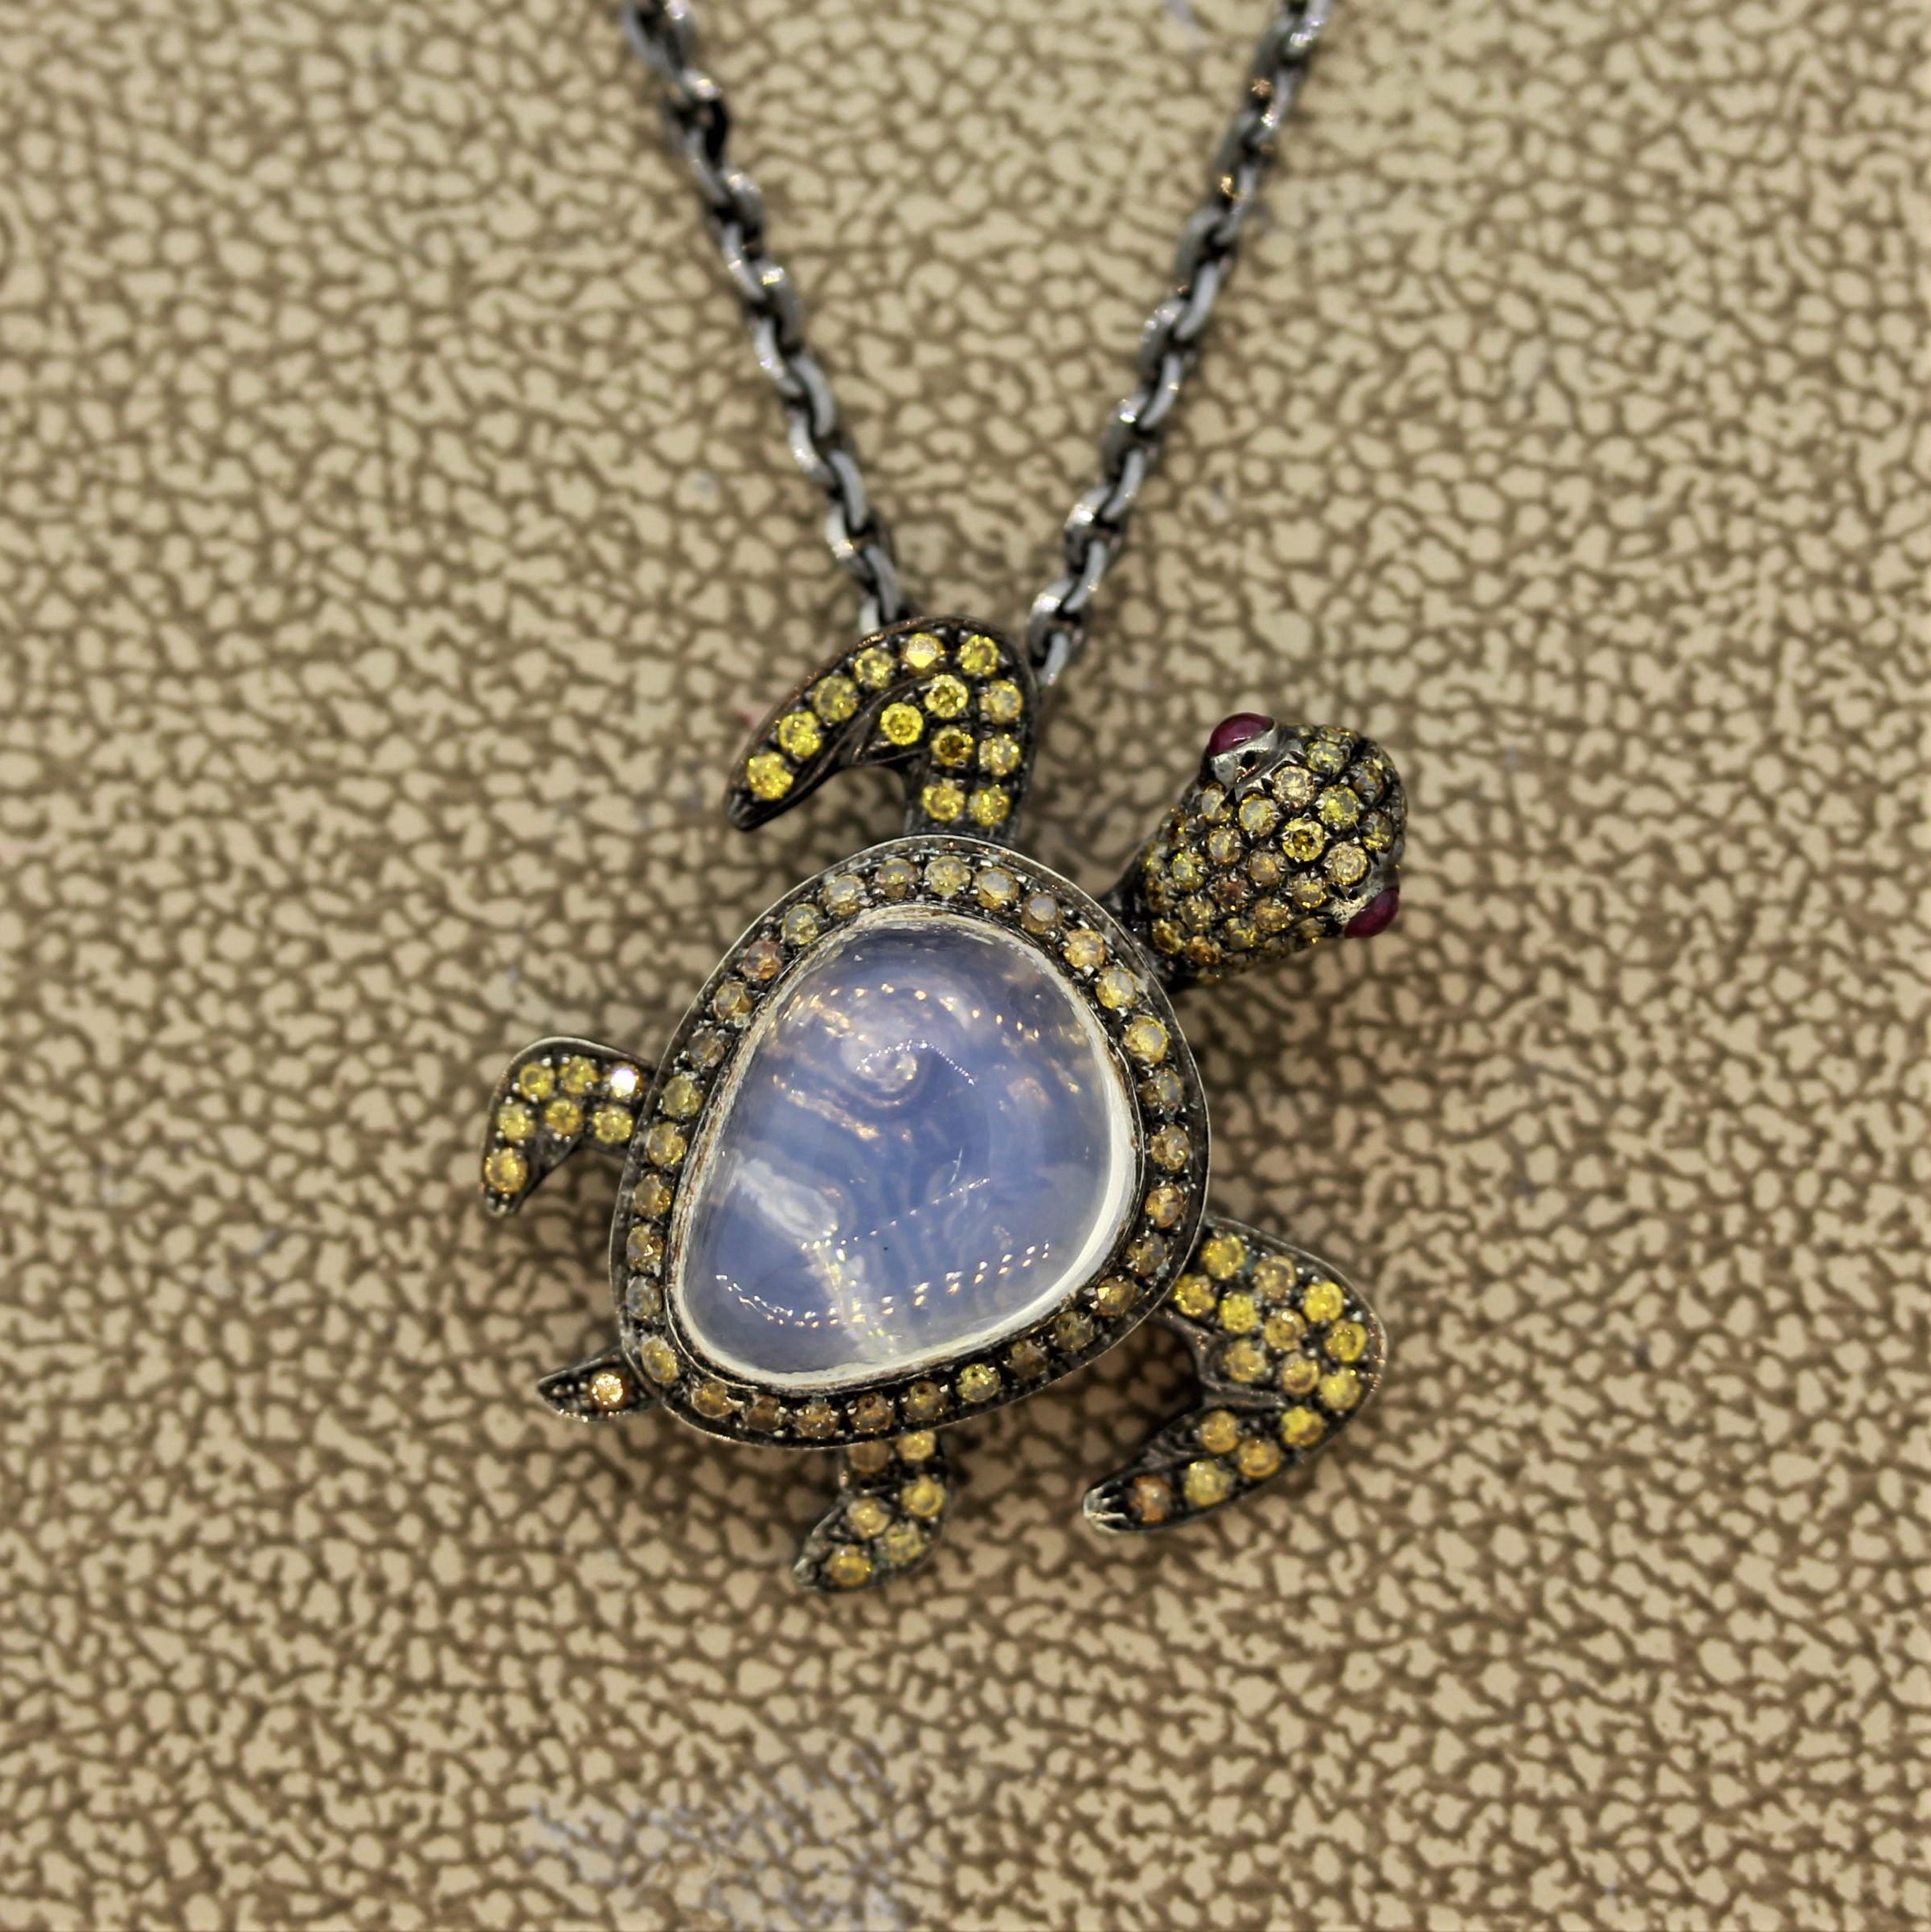 A fun piece featuring 0.62 carats of fancy colored diamonds, 2 cabochon rubies and a 4.03 carat opal. All these come together to create a cute and playful sea turtle! Made in 18k gold and finished with black rhodium to give the piece a black